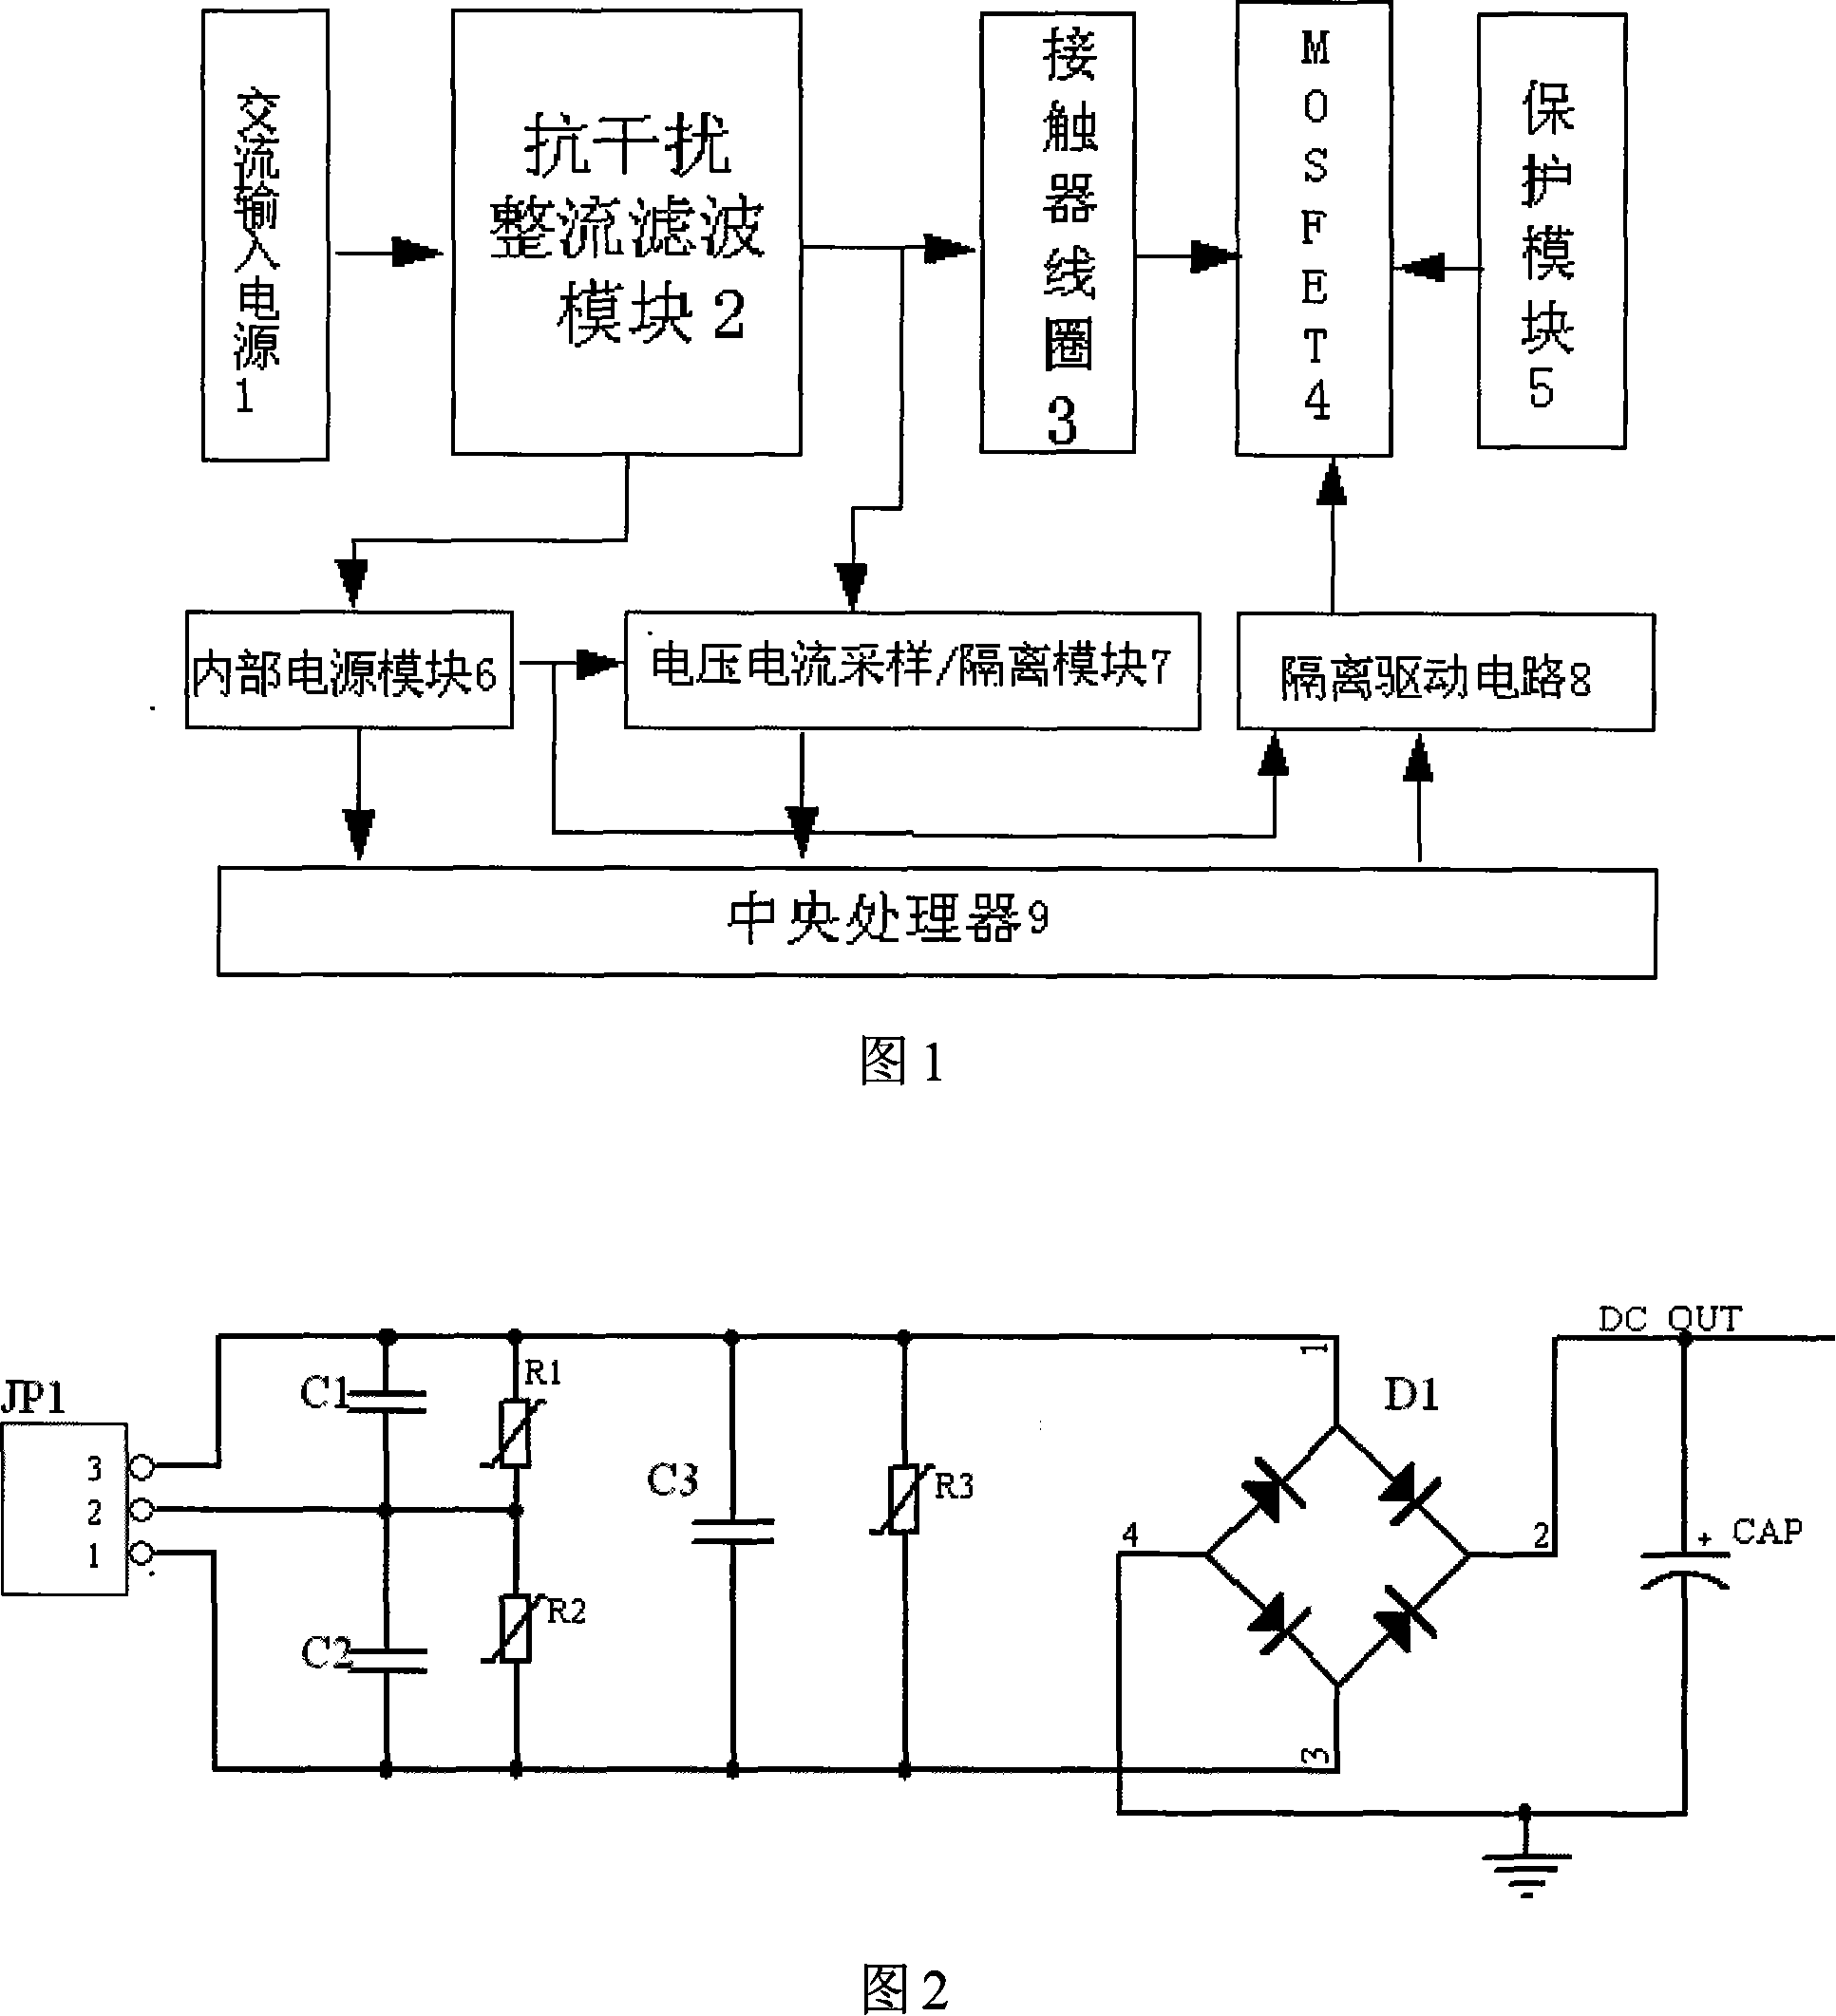 Intelligent AC contactor control unit based on current-variable control